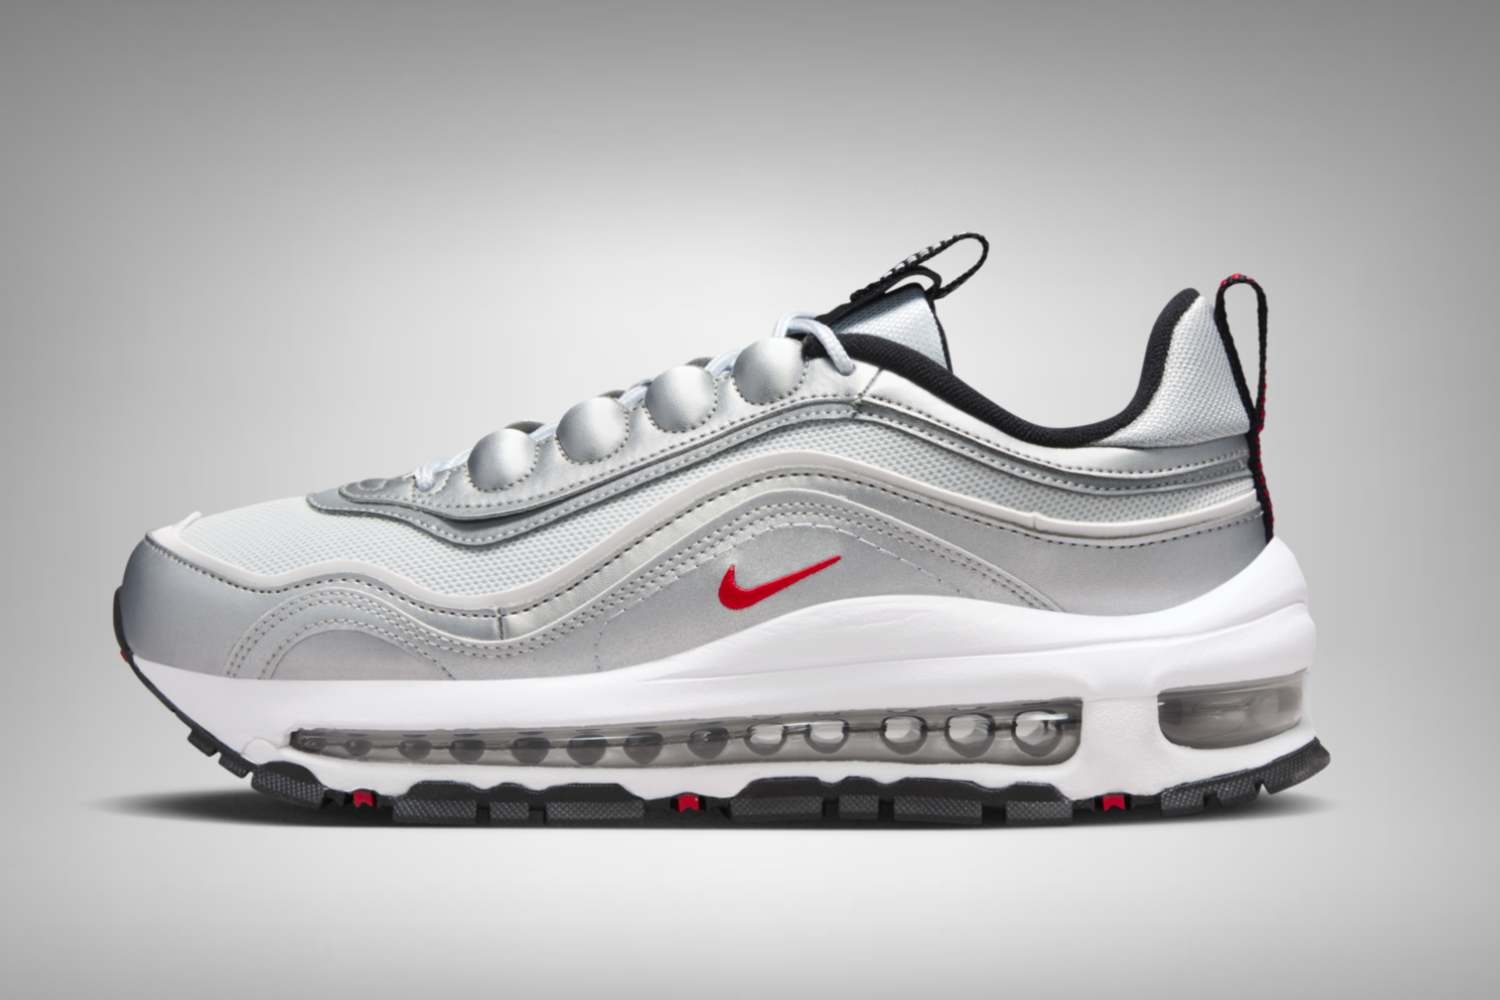 Nike honours the OG 'Silver Bullet' with the Nike Air Max 97 Futura